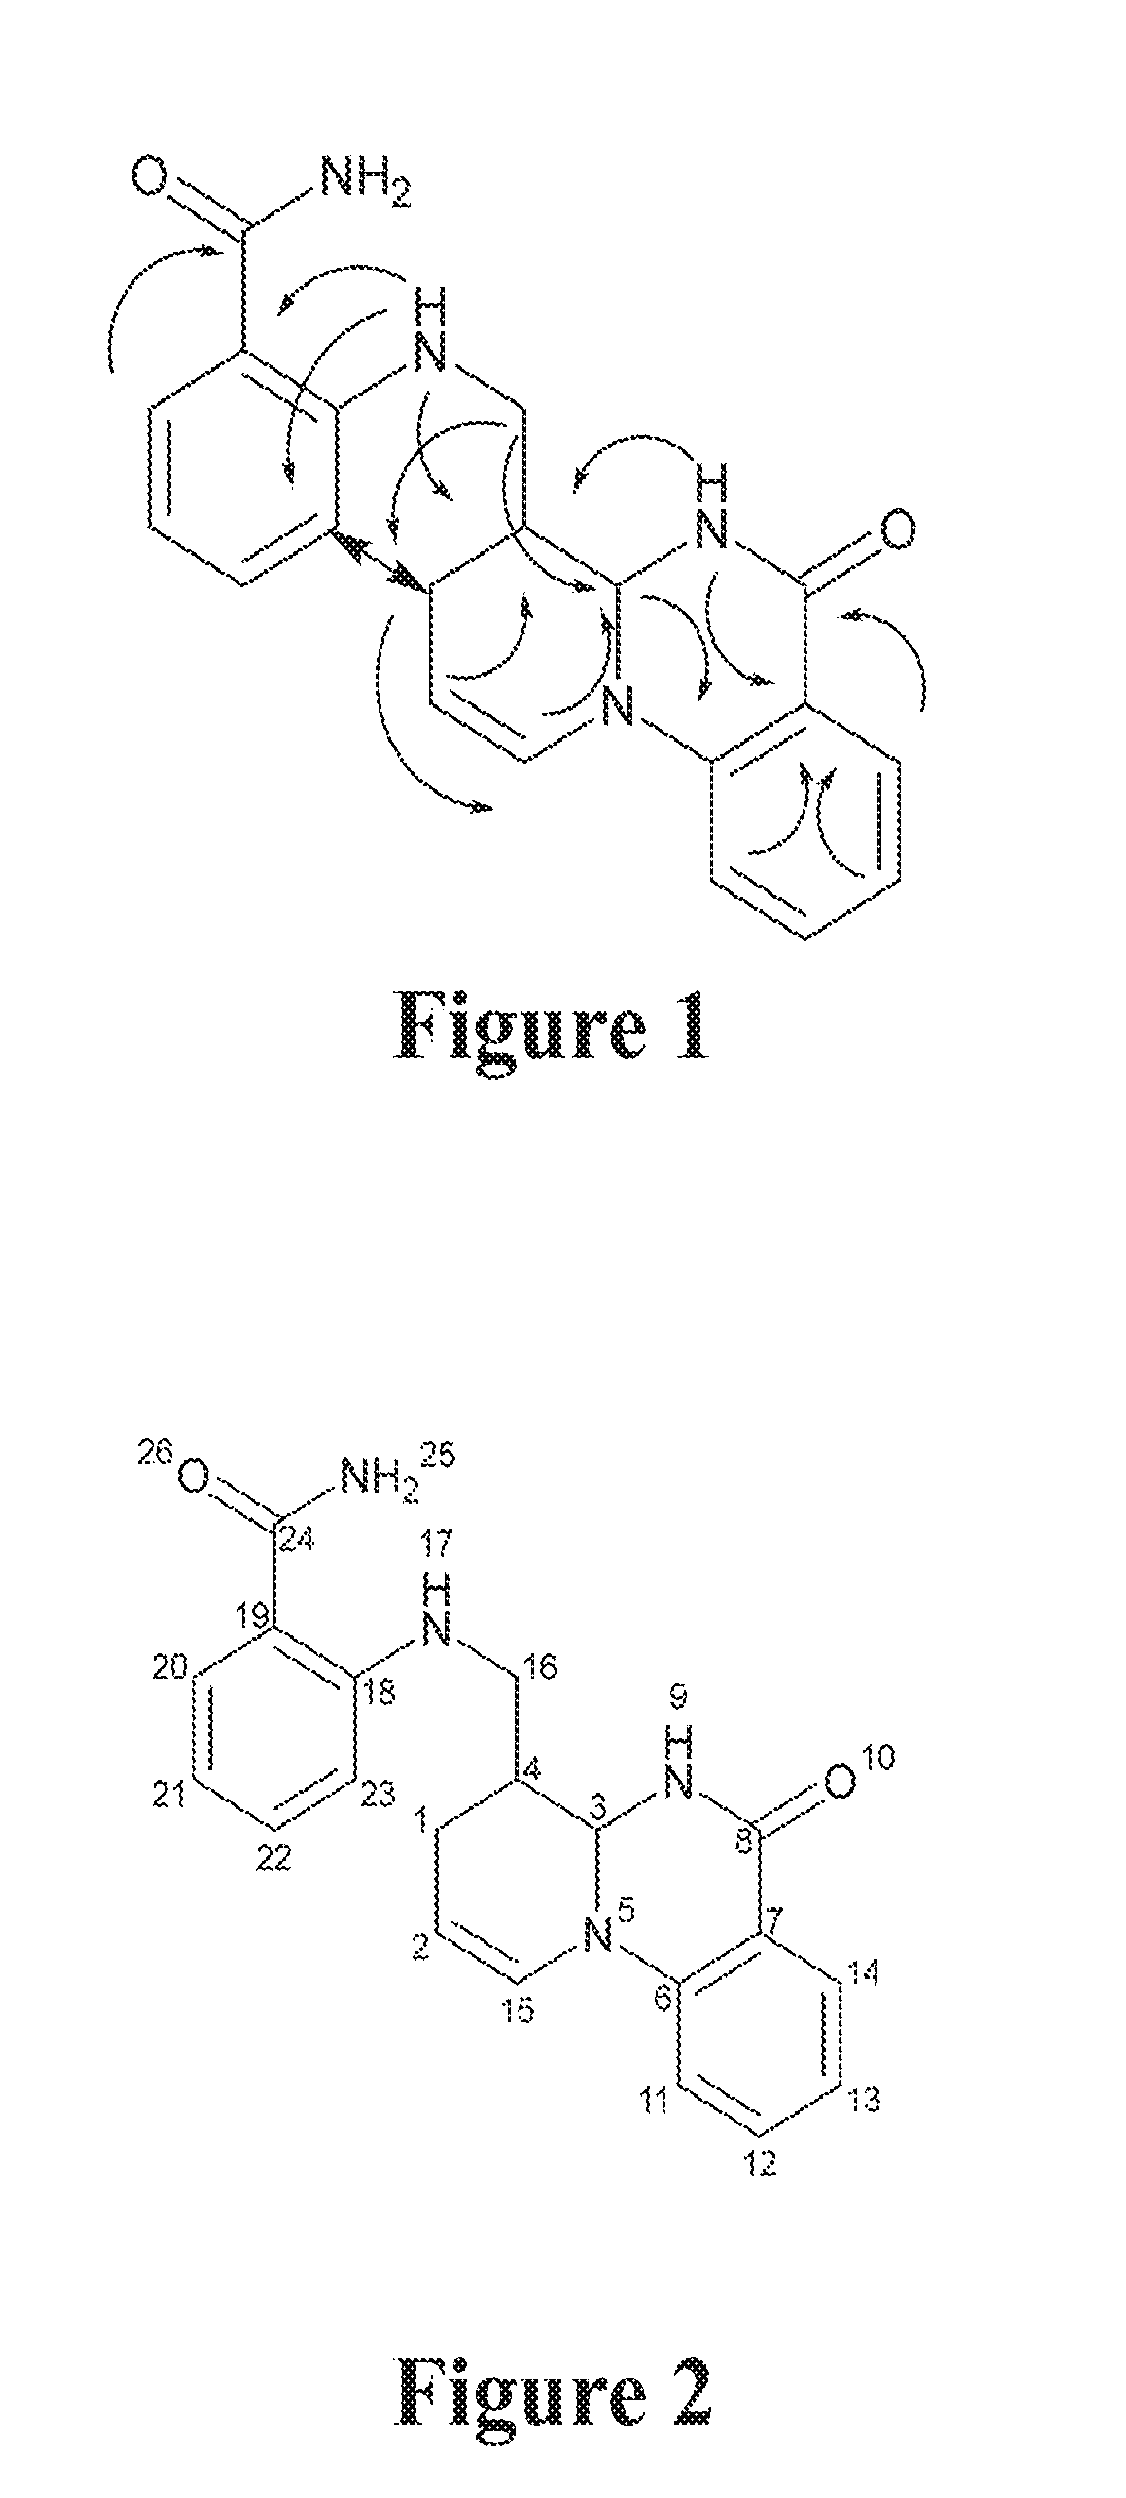 Acrolein scavenging in ptf and other 1,3-propanediol derived polymers